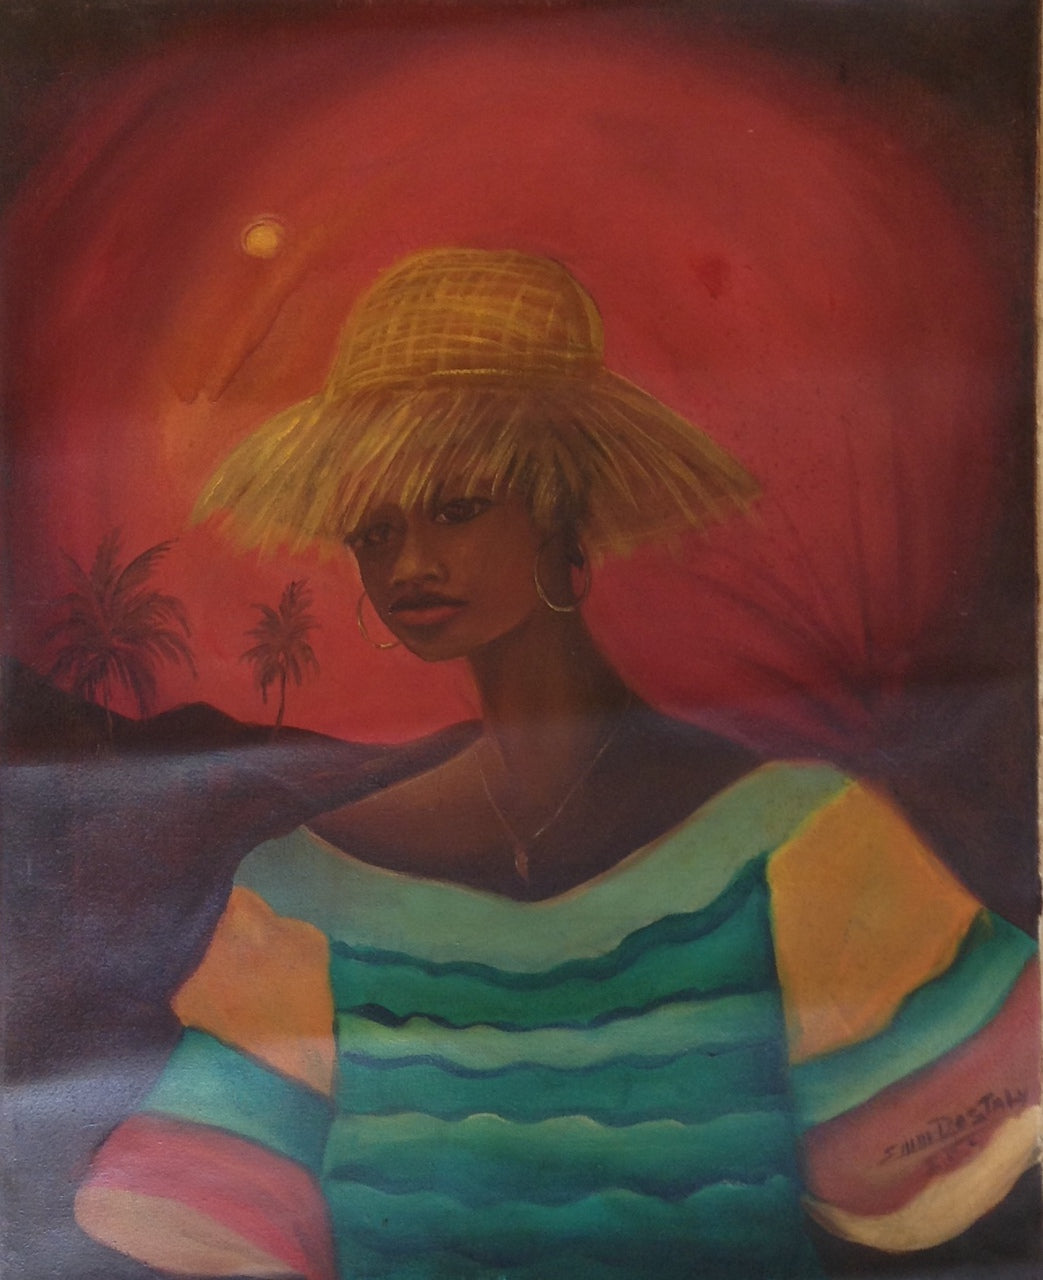 Emmanuel Dostaly 30"x24" Lady with a Hat c1990 Oil on Canvas Painting #3-2-95MFN